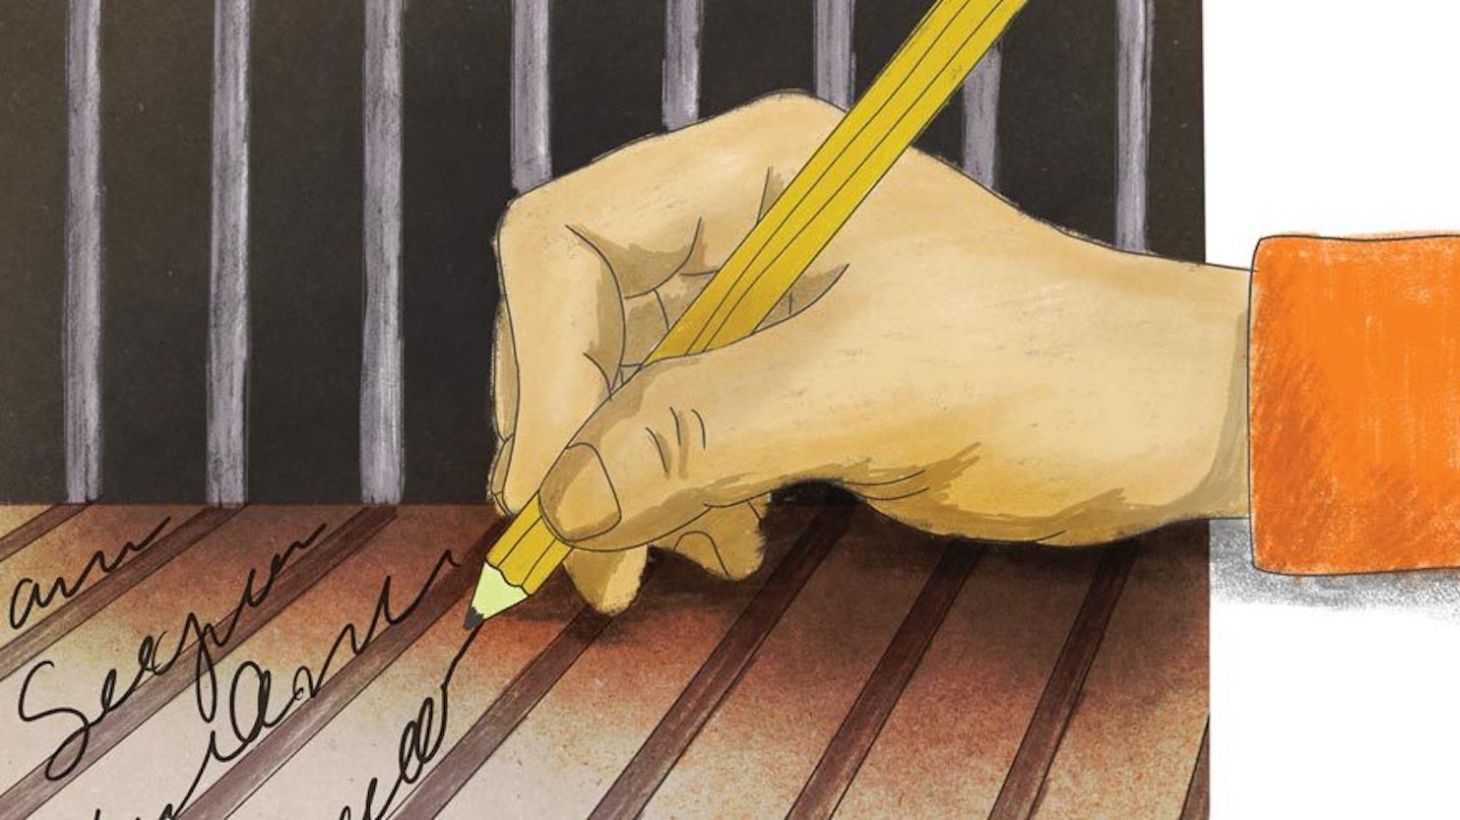 A drawing of a hand holding a pencil and writing in cursive.